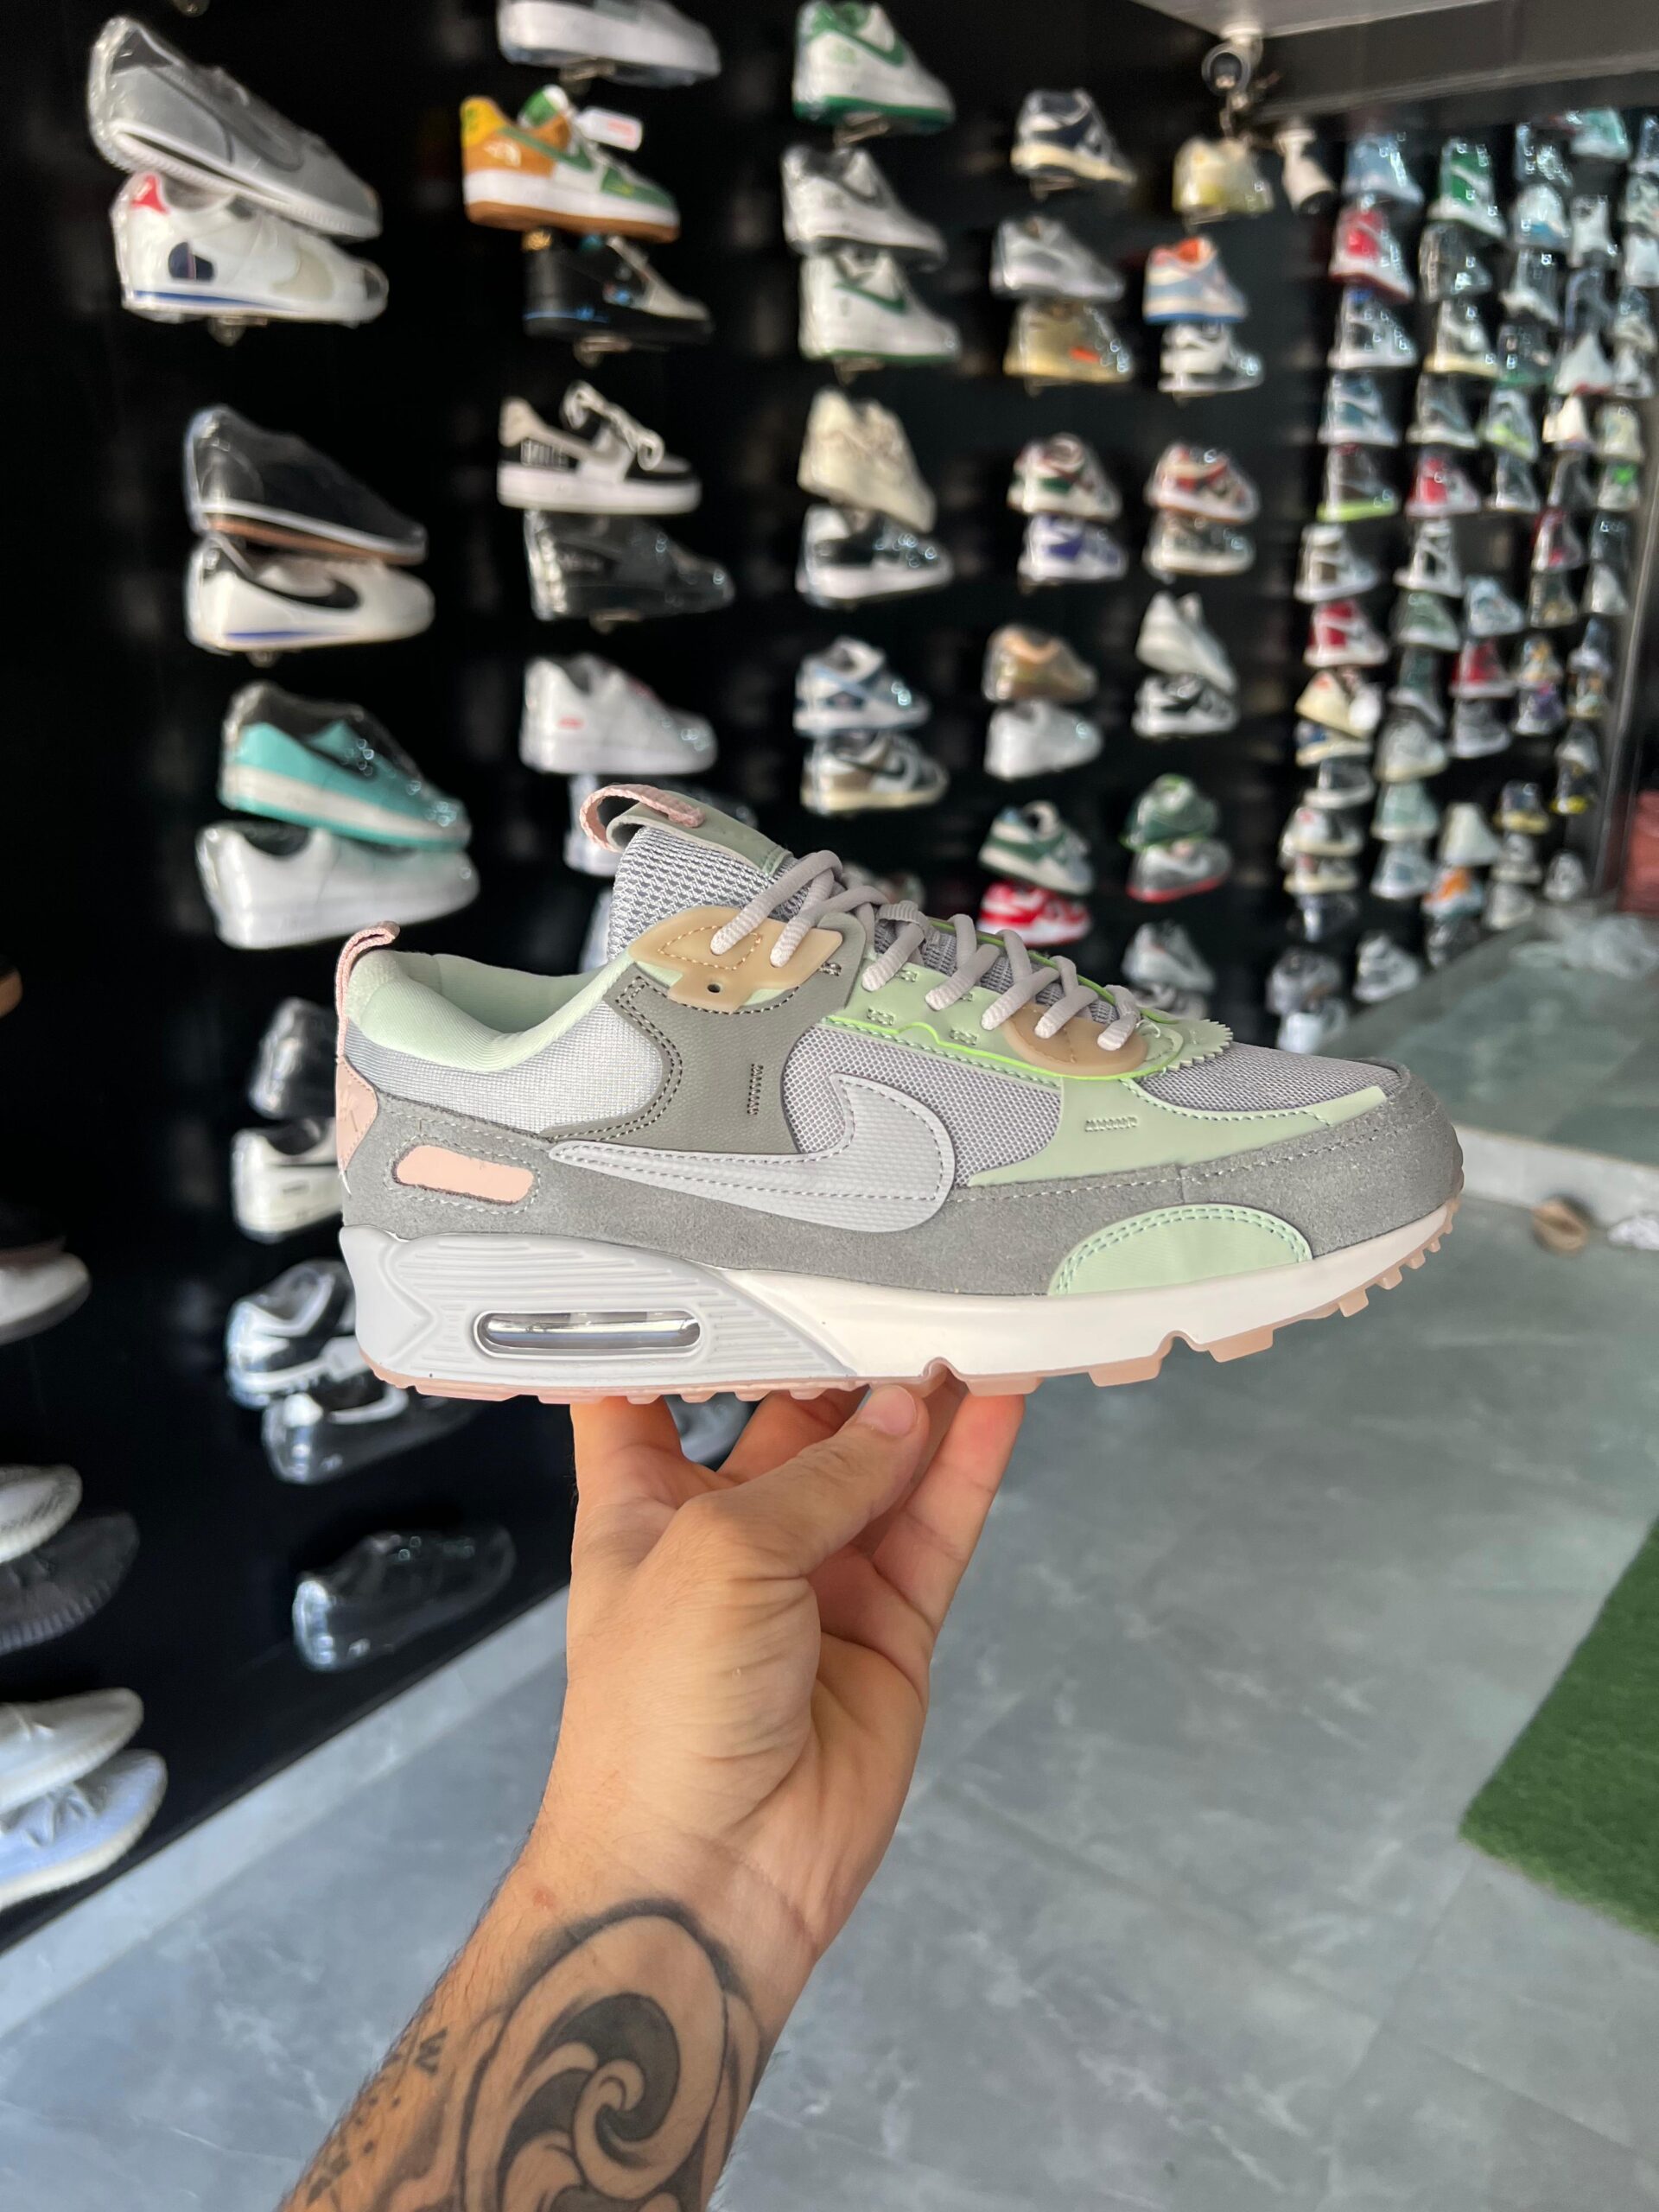 Airmax Futura Sneakers For Boys 2 New Colors